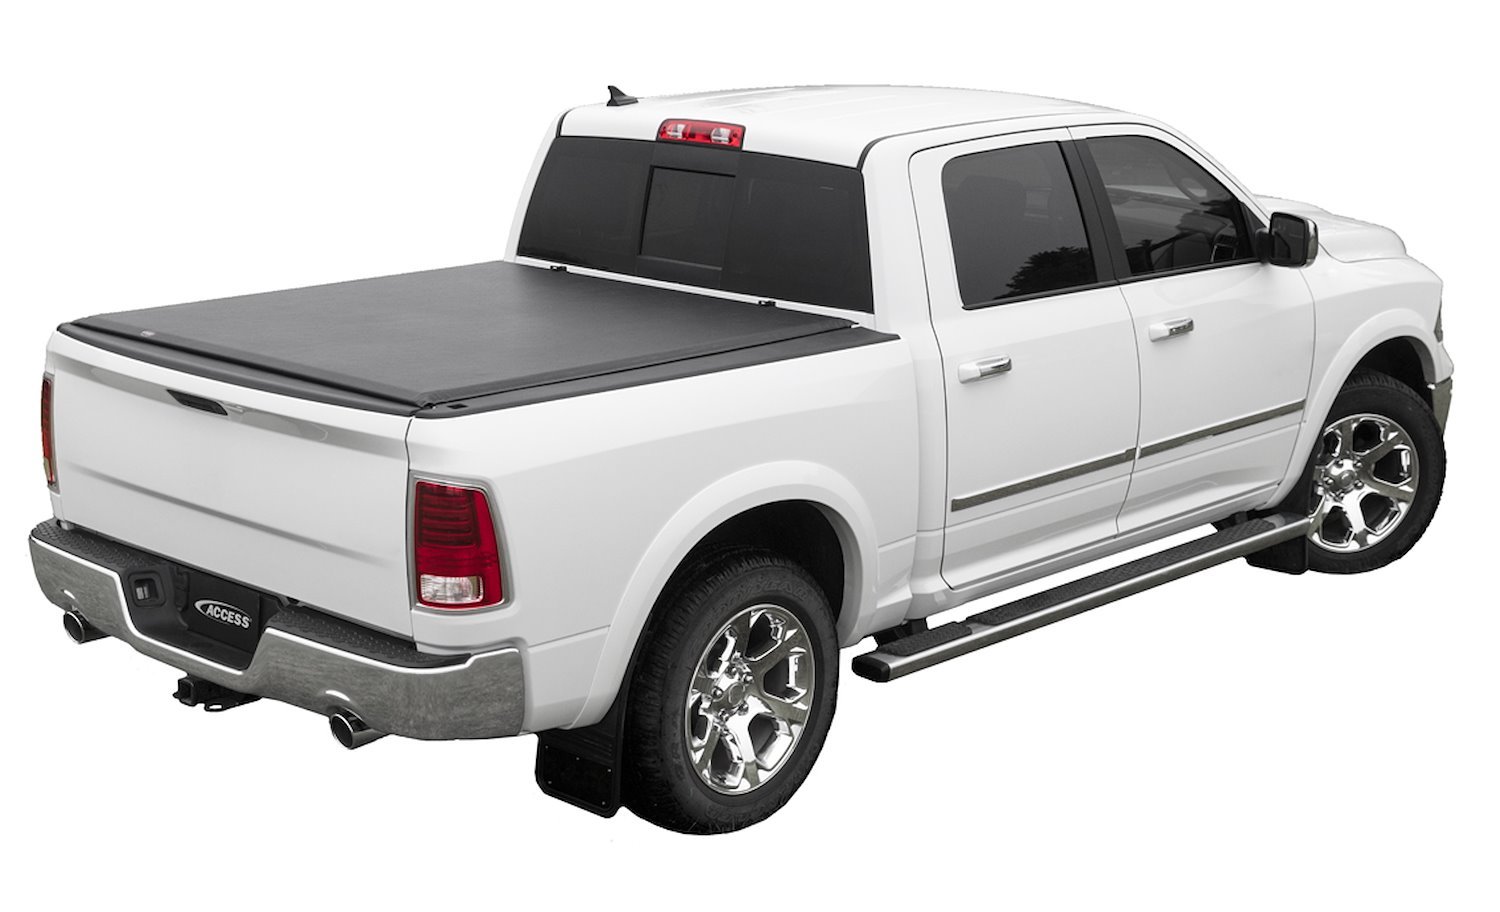 LORADO Roll-Up Tonneau Cover, Fits Select Ram 2500/3500, with 6 ft. 4 in. Bed